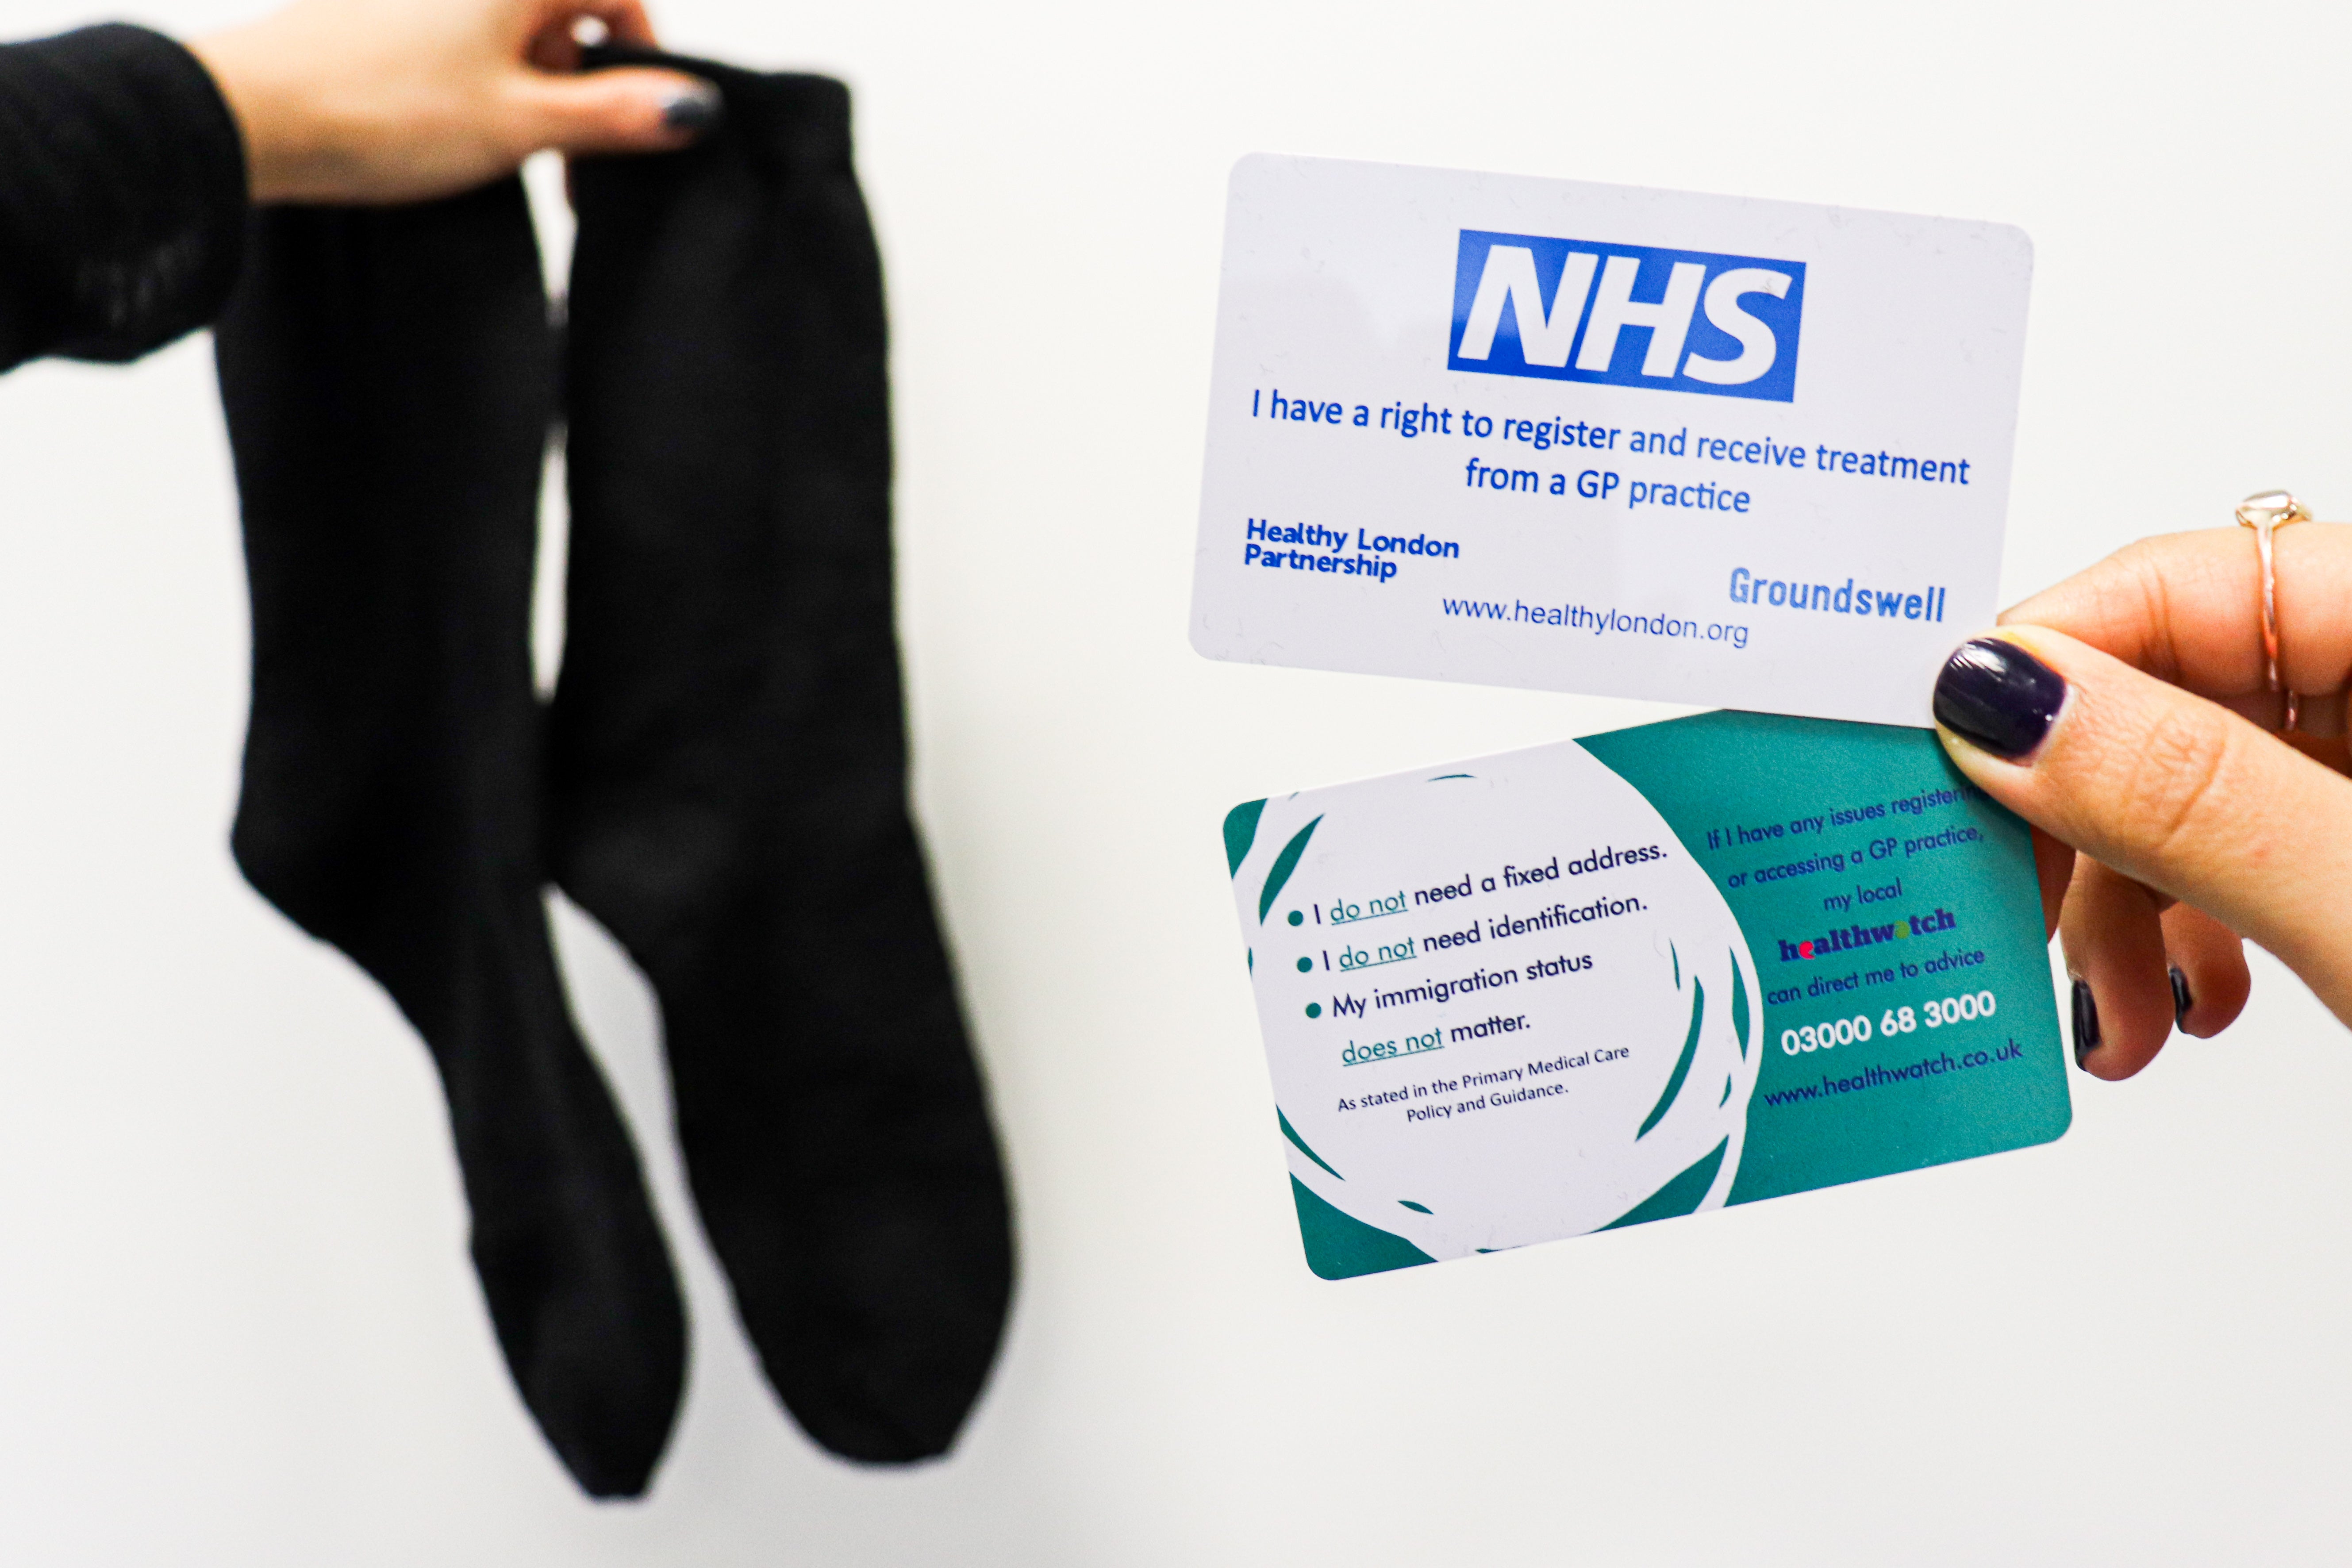 Groundswell NHS 'My Right to Healthcare' Cards